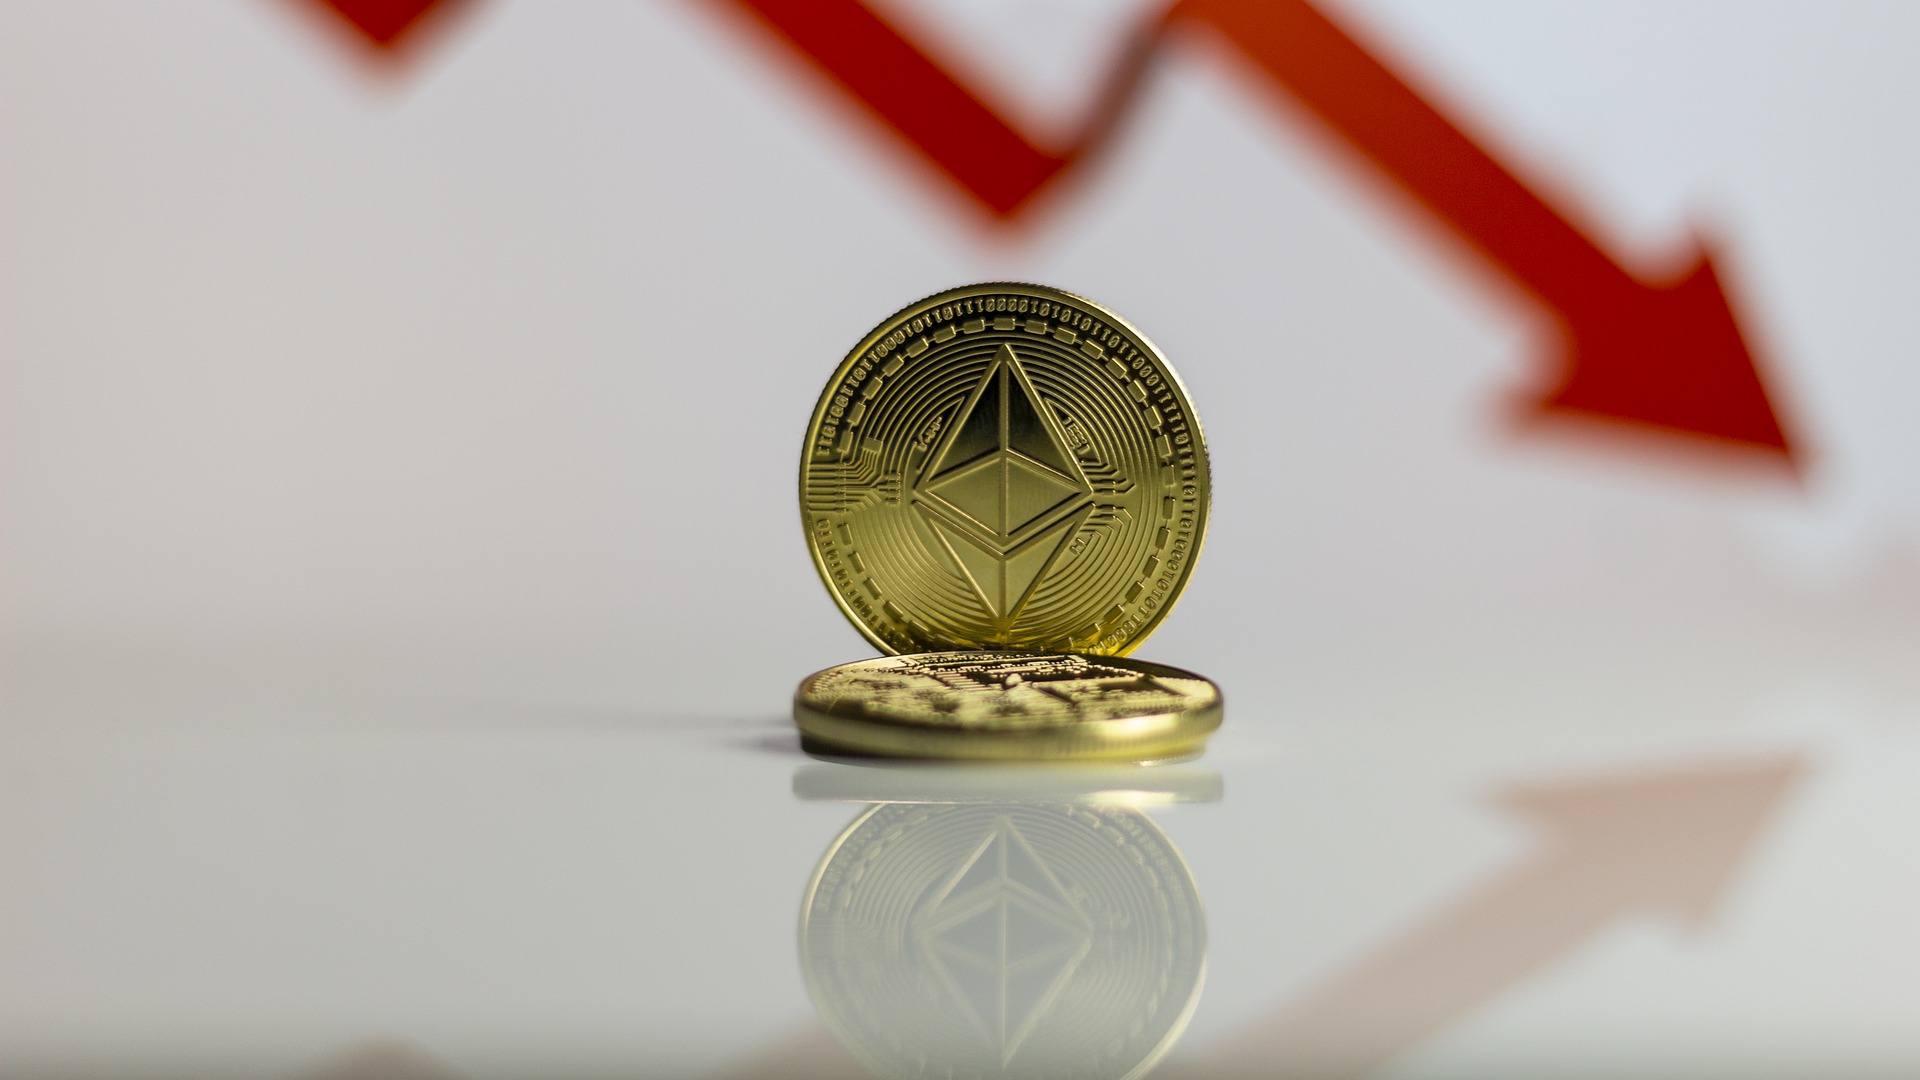 Standard Chartered Remains Bullish on Crypto as Ether ETF Approval Delays are ‘Priced in’